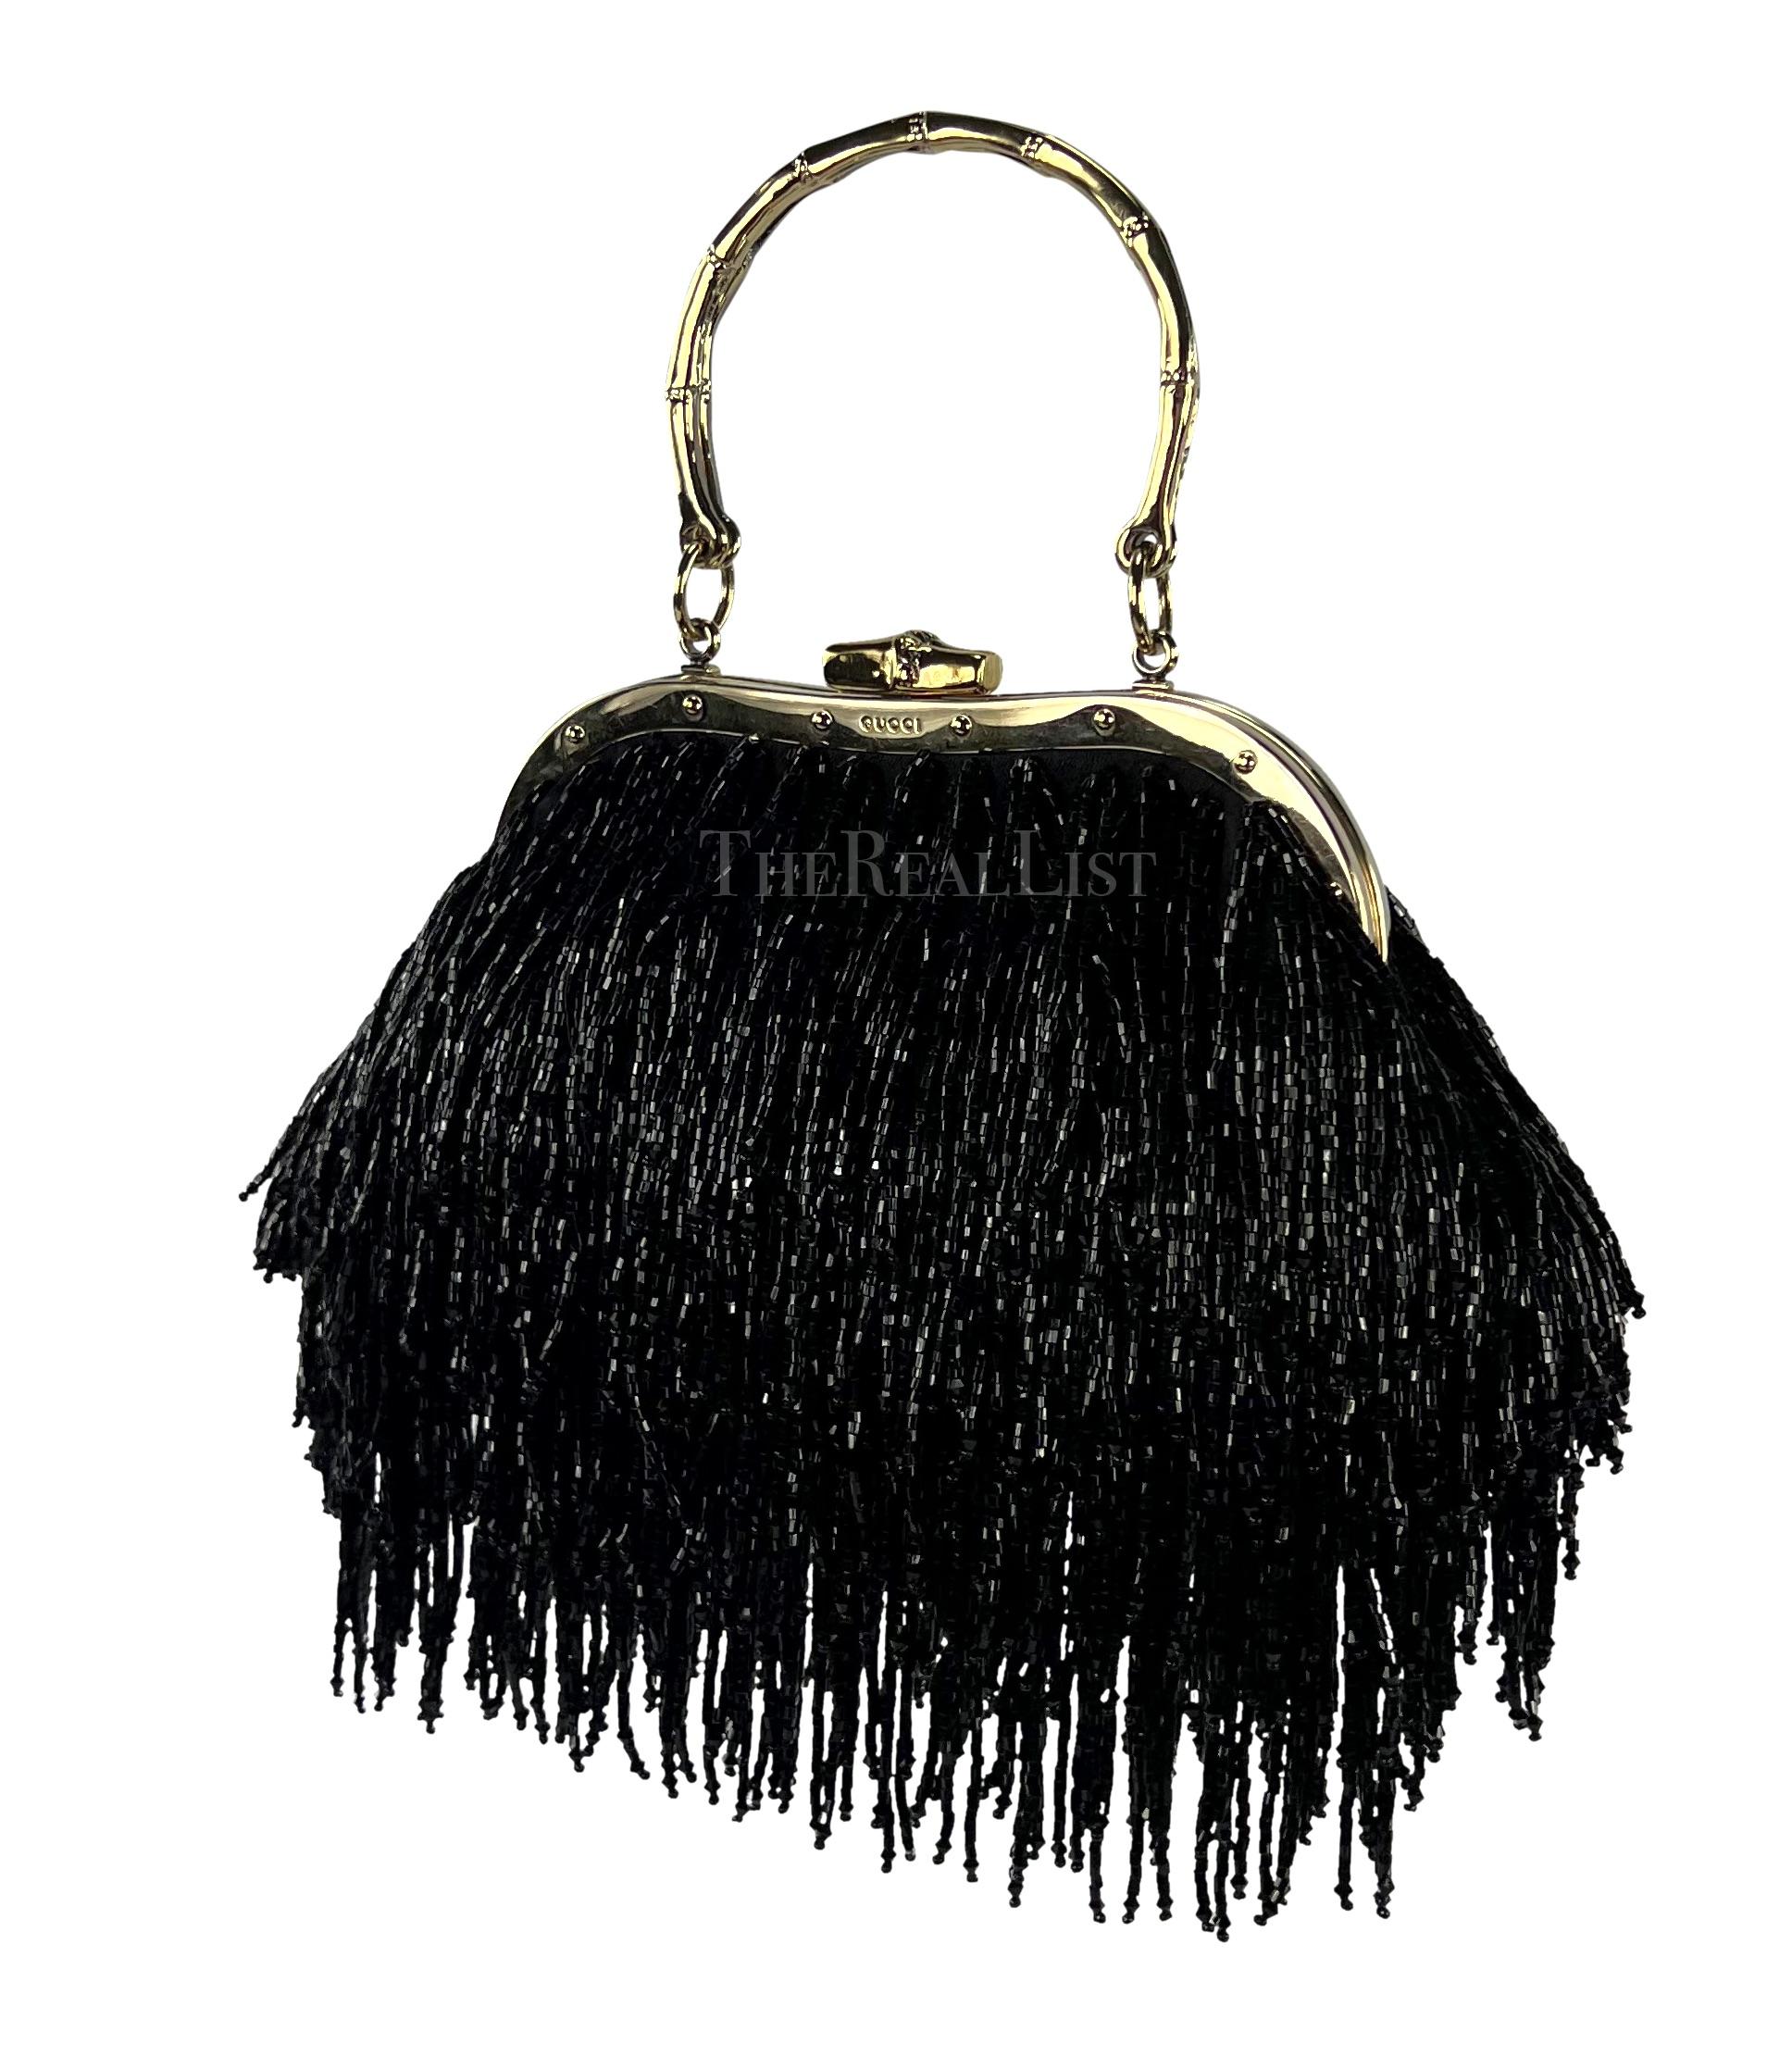 Presenting an incredible black beaded fringe Gucci mini bag, designed by Tom Ford. Step into the realm of pure glamour with this extraordinary black beaded fringe Gucci mini bag, a masterpiece by the legendary Tom Ford. Introduced in the Fall/Winter